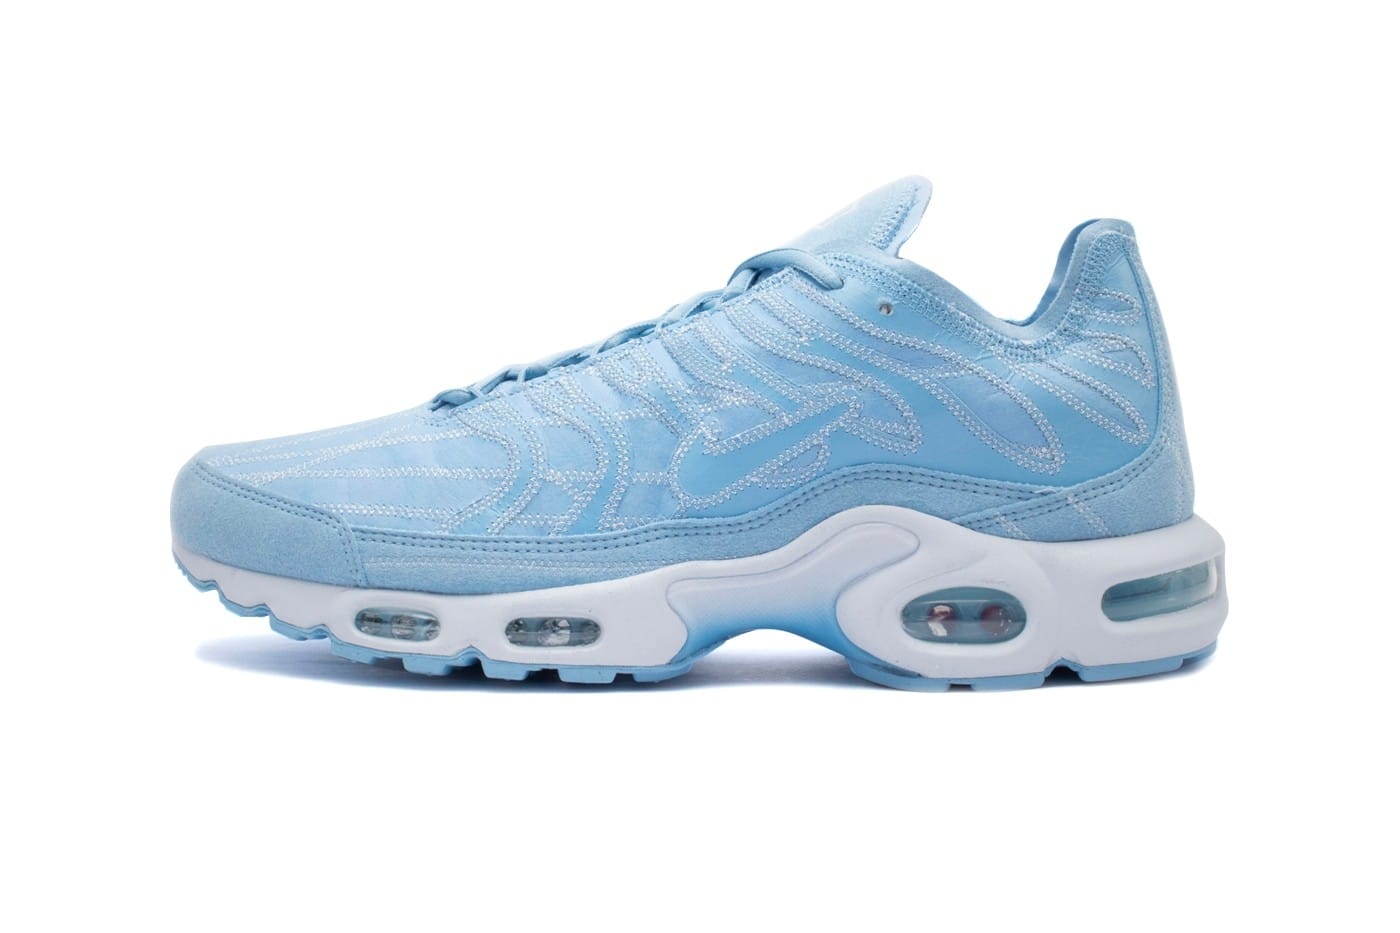 Air Max Plus in Deconstructed Blue 